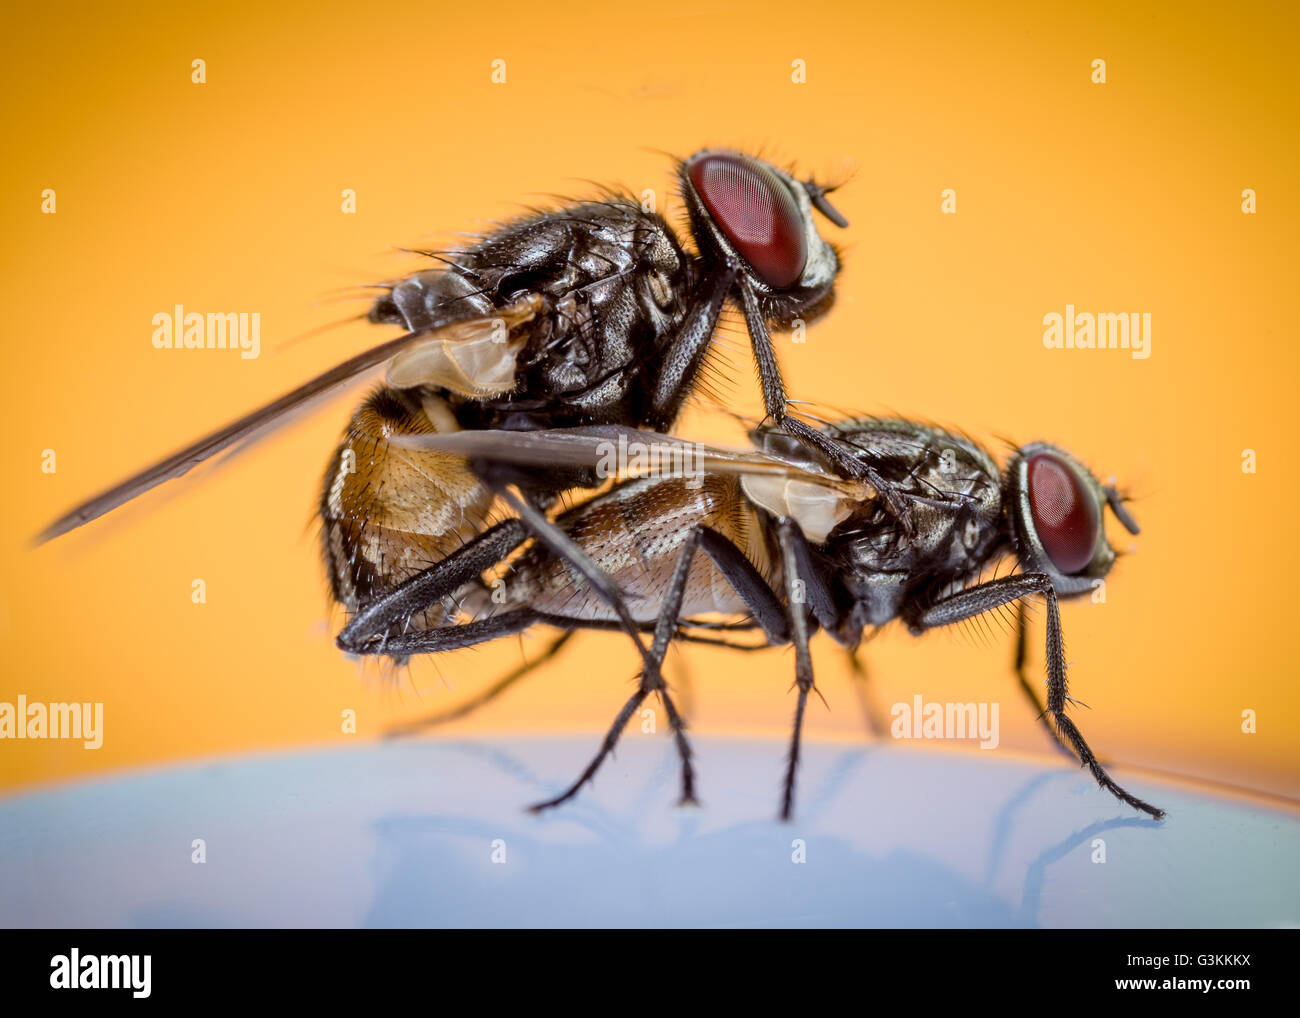 two house flies copulating on an orange background Stock Photo